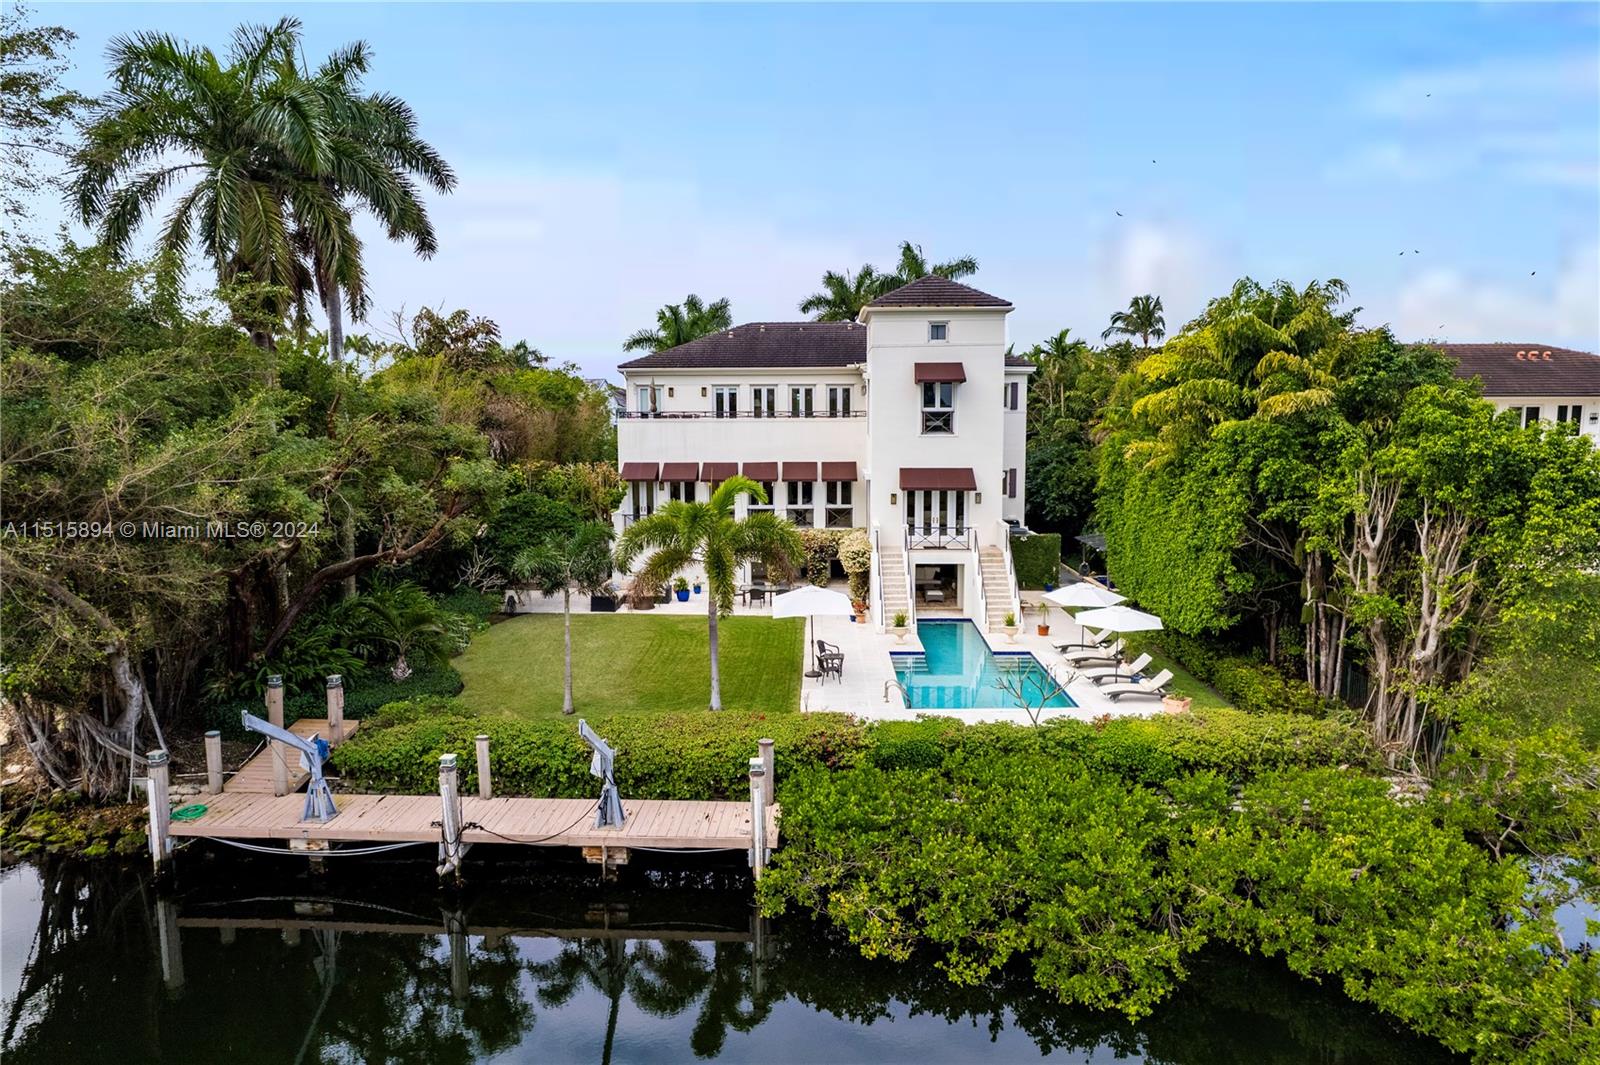 285 Costanera Rd, Coral Gables, Florida 33143, 6 Bedrooms Bedrooms, ,6 BathroomsBathrooms,Residential,For Sale,285 Costanera Rd,A11515894